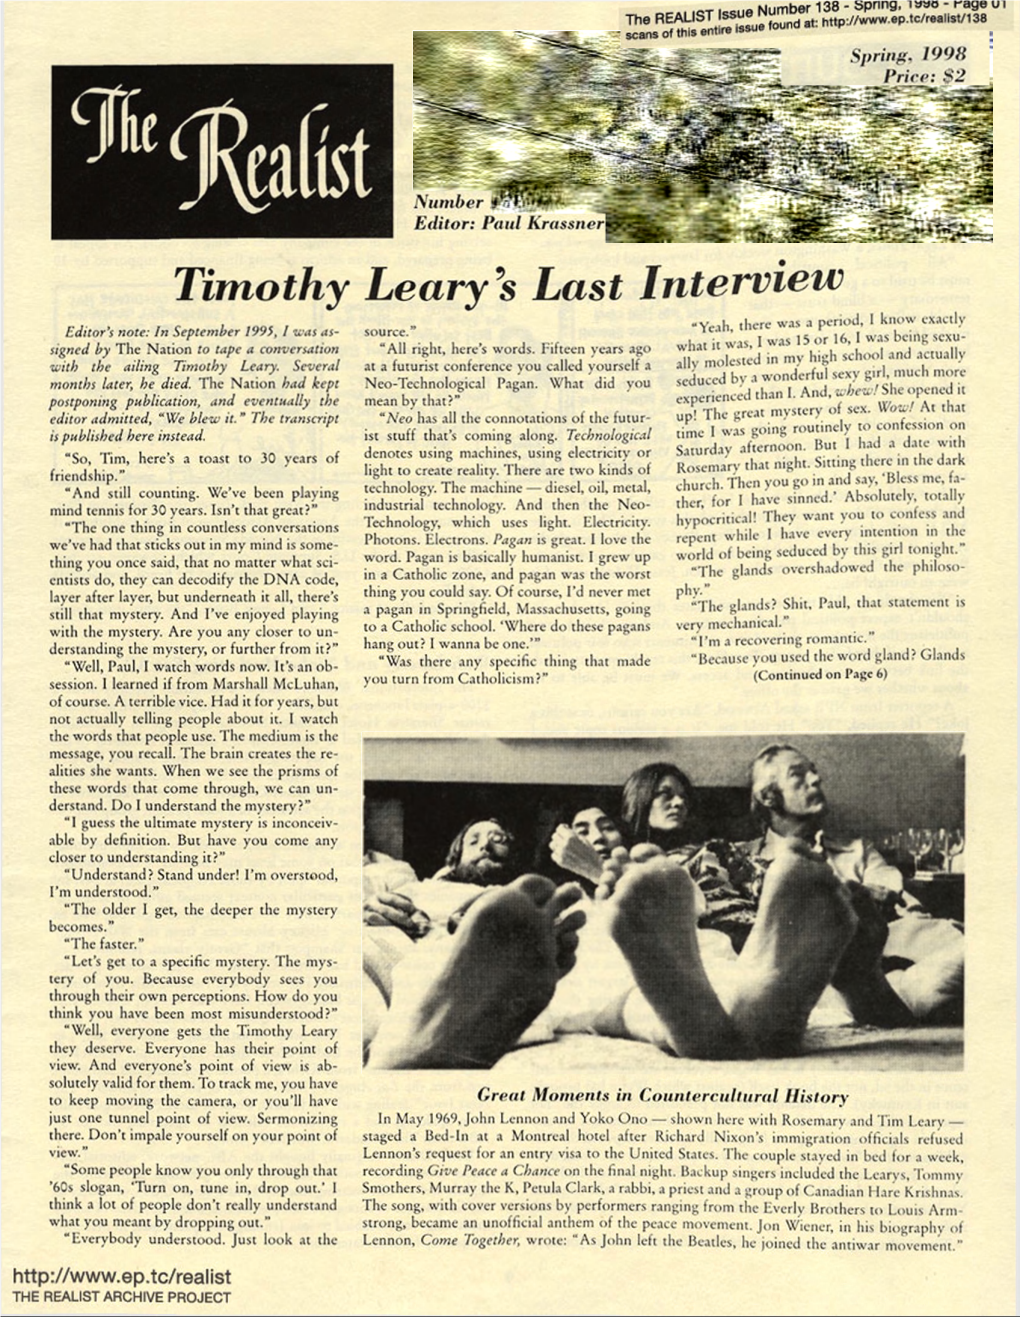 Timothy Leary's Last Interview